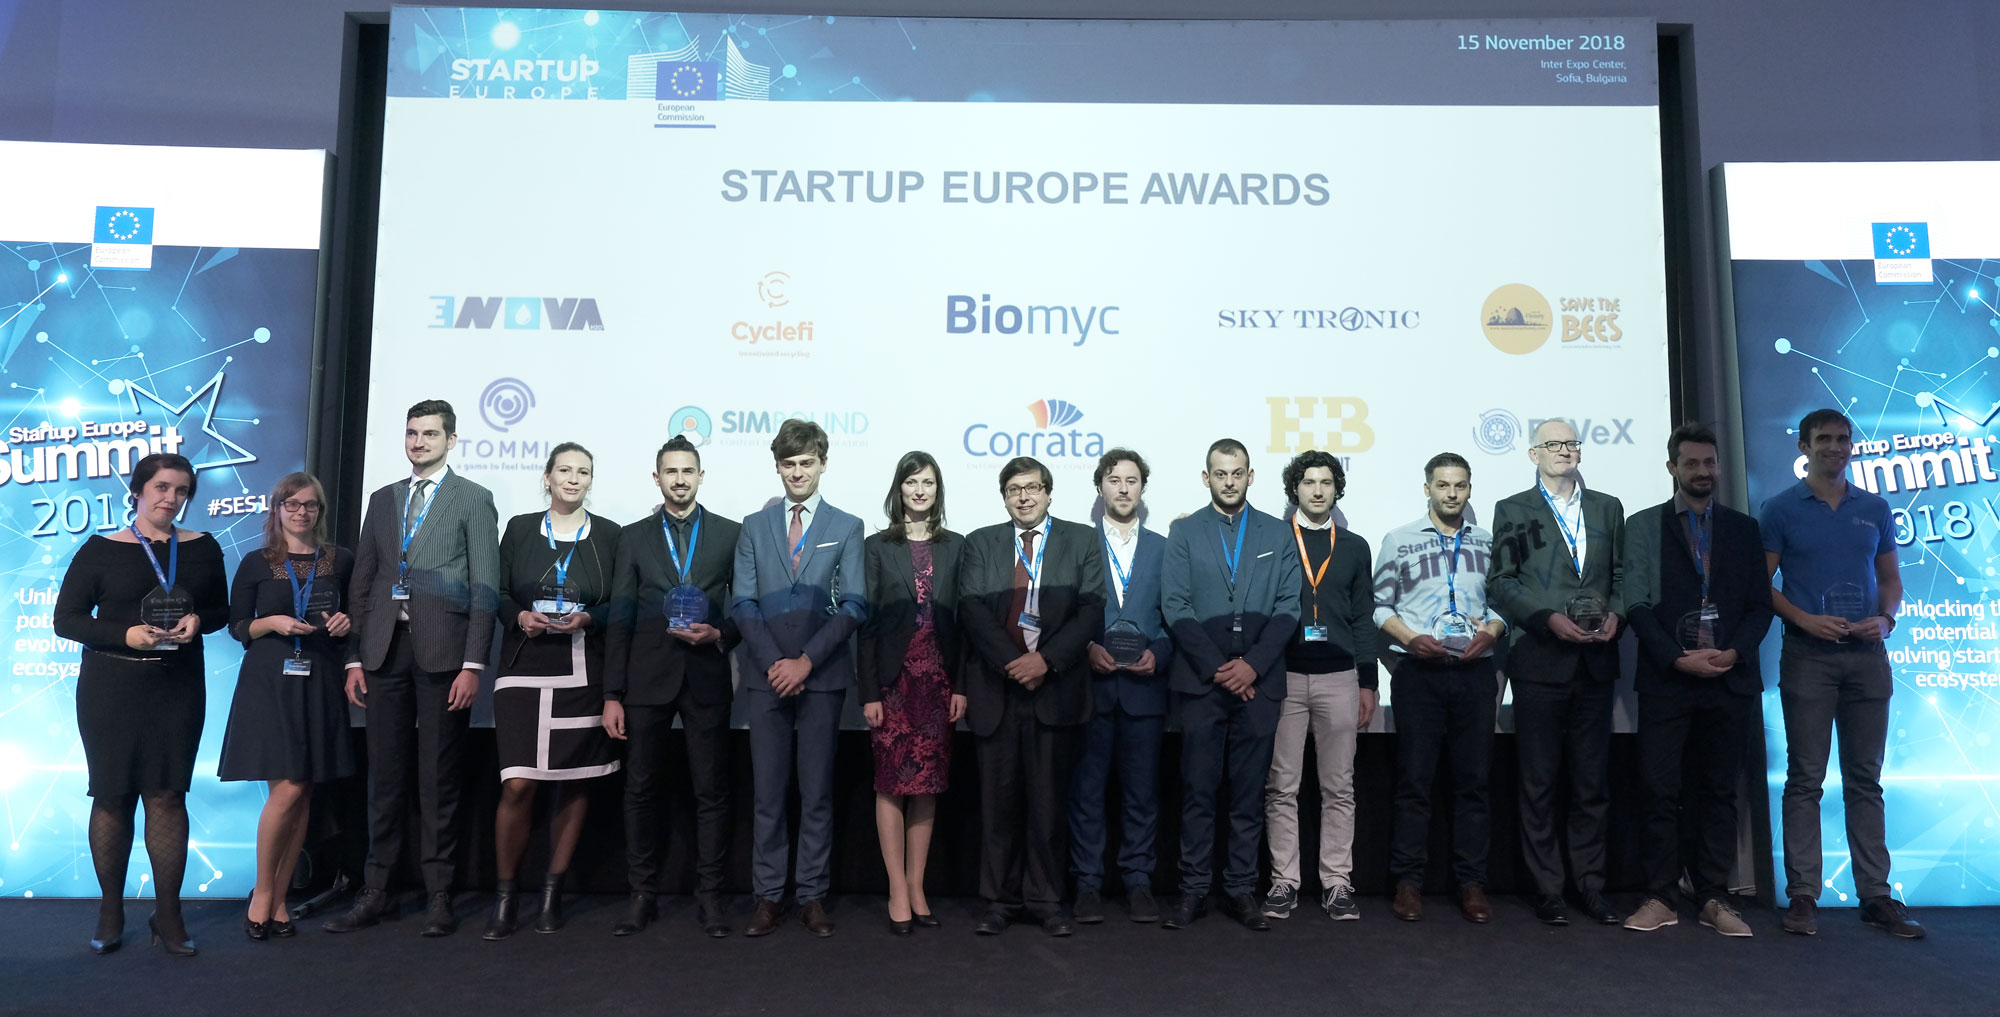 StartUp Europe Awards recognizes the best European startups in 18 categories